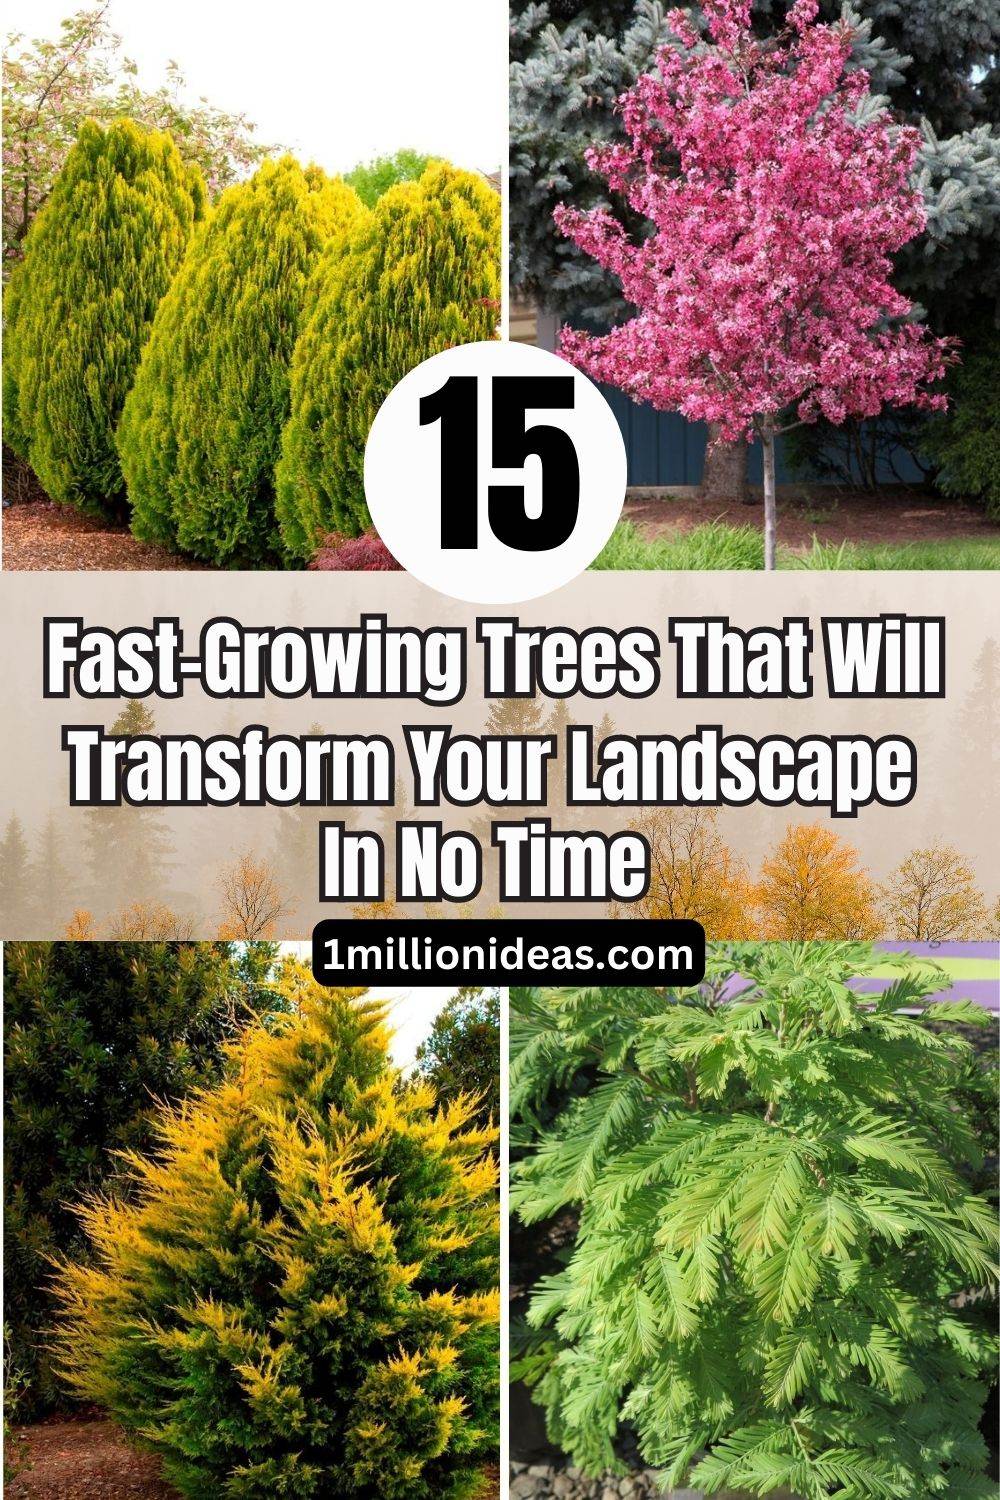 15 Fast-Growing Trees That Will Transform Your Landscape In No Time - 101